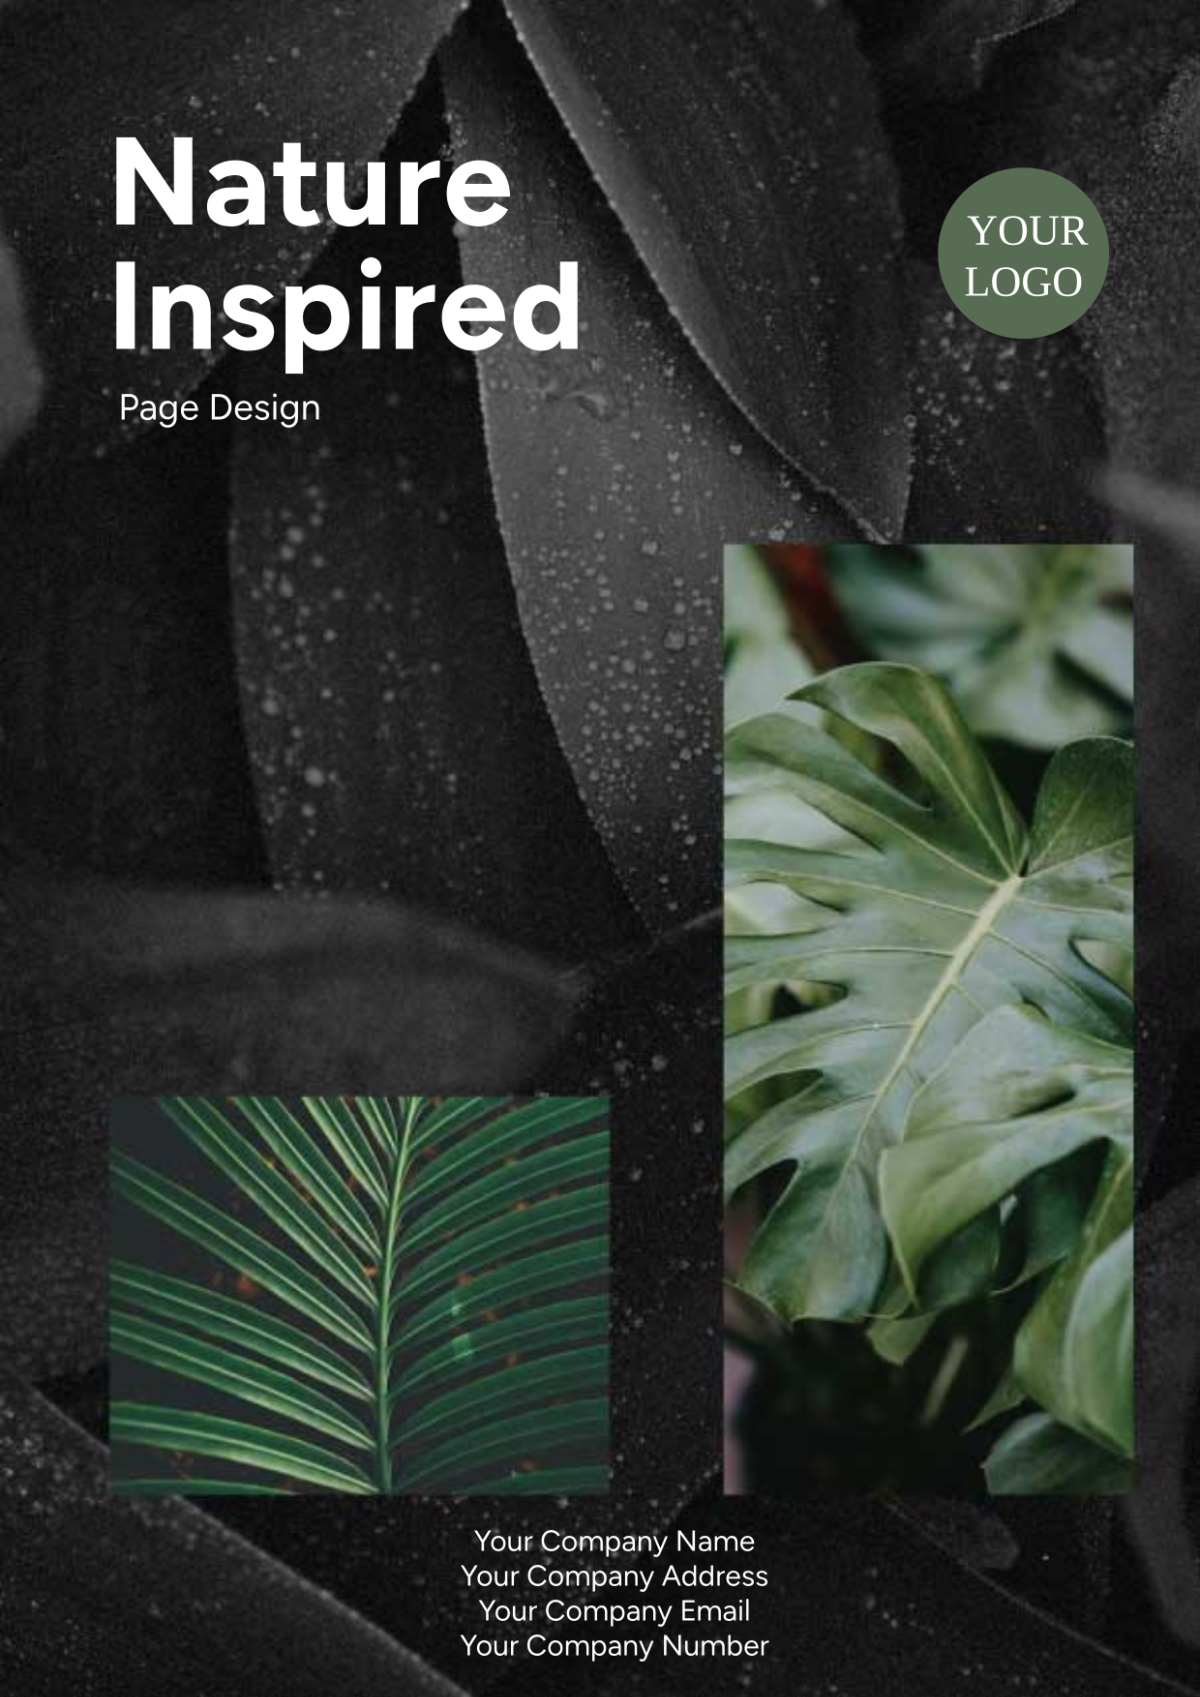 Nature-Inspired Cover Page Design